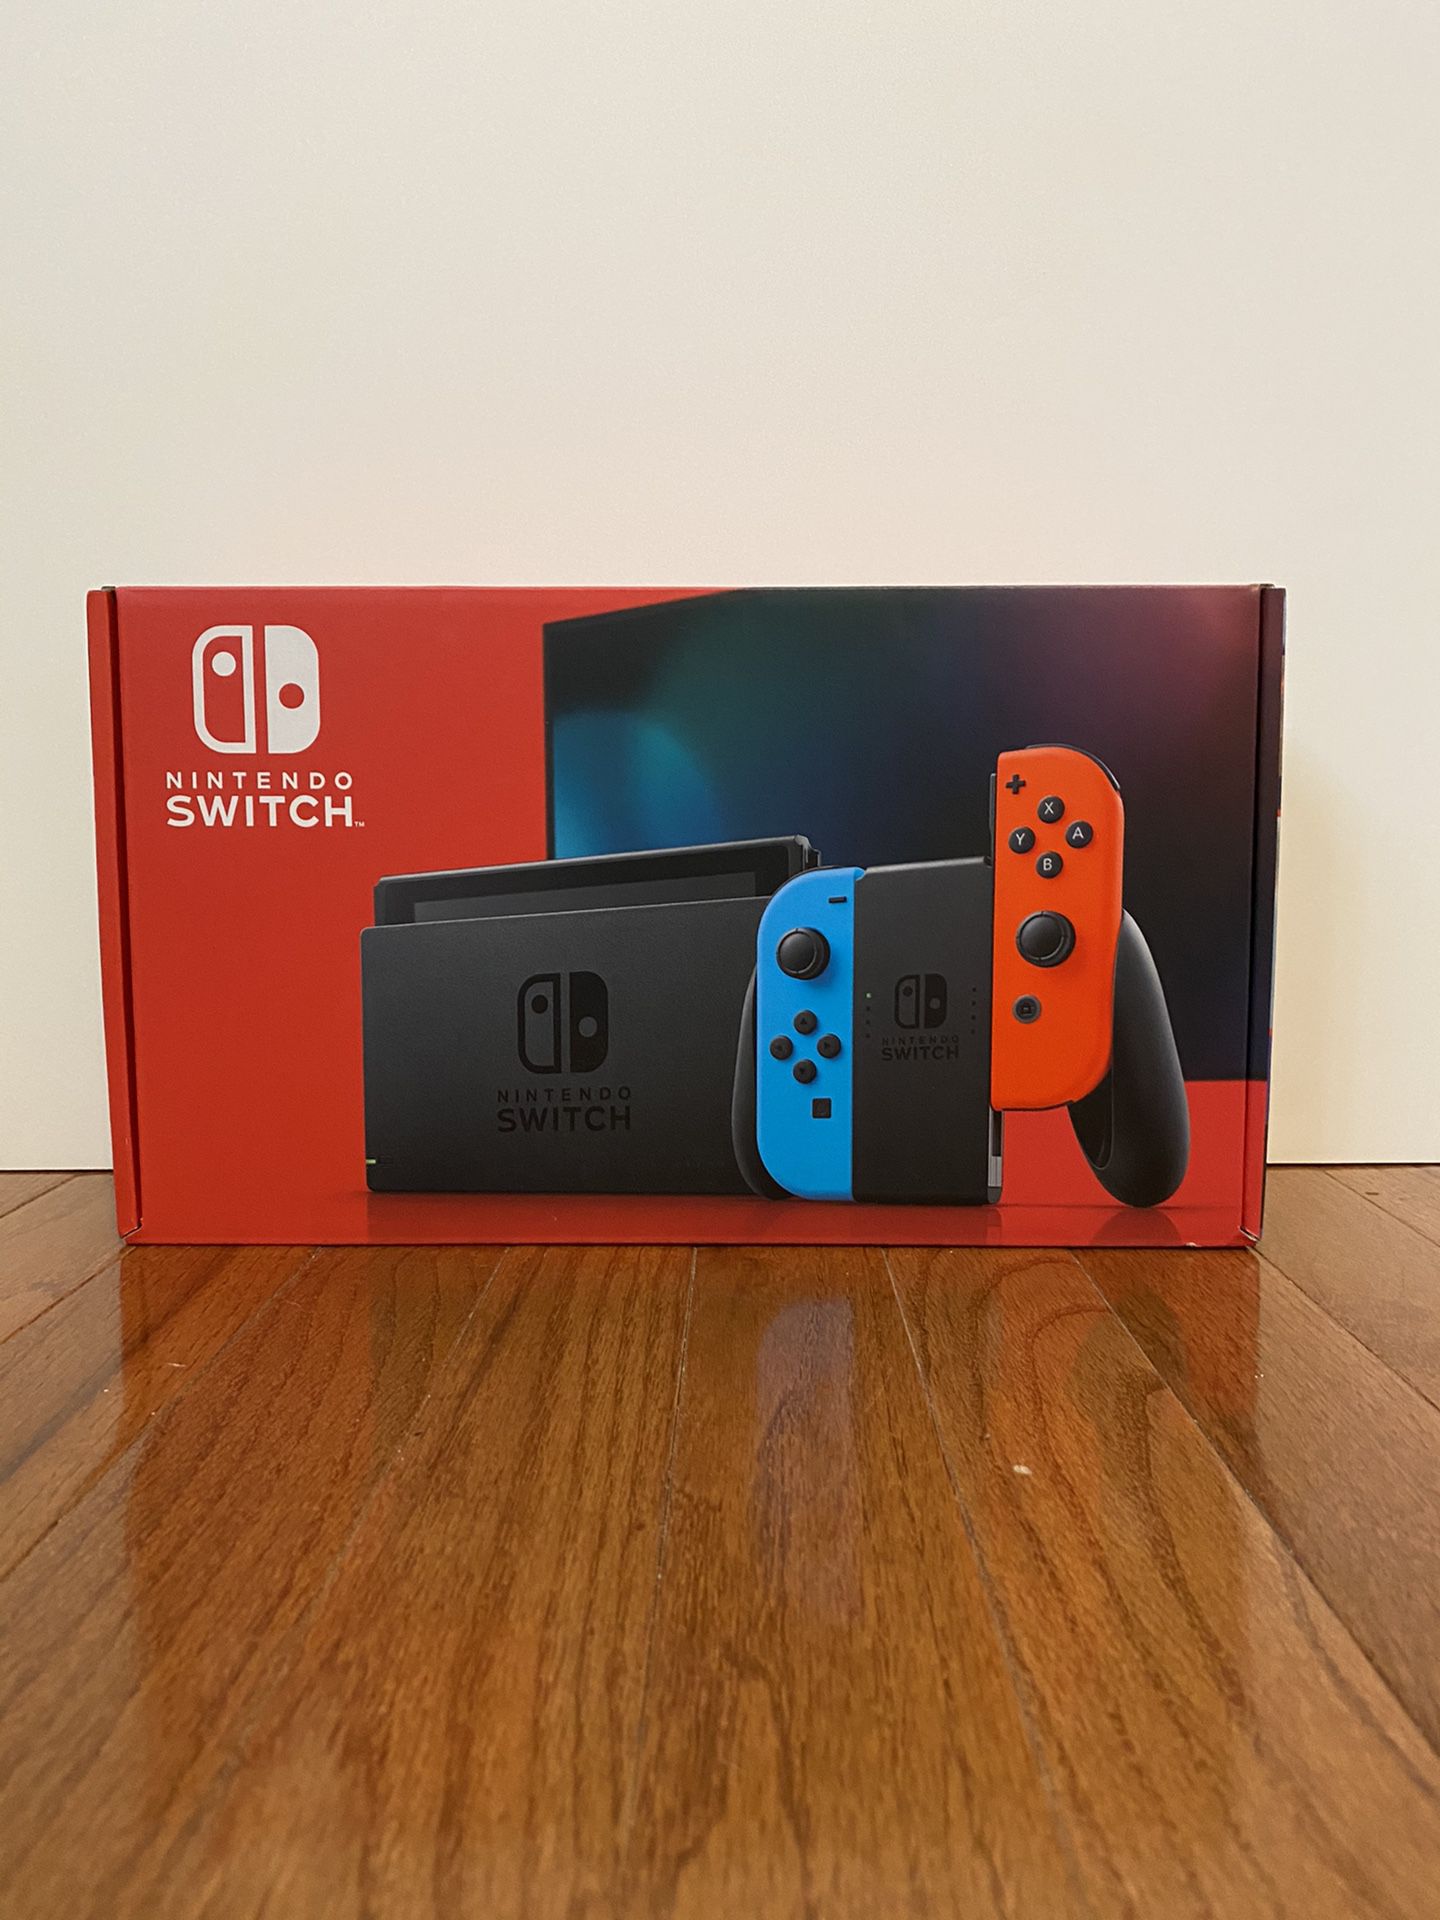 Brand new Nintendo switch unopened red and blue joycons